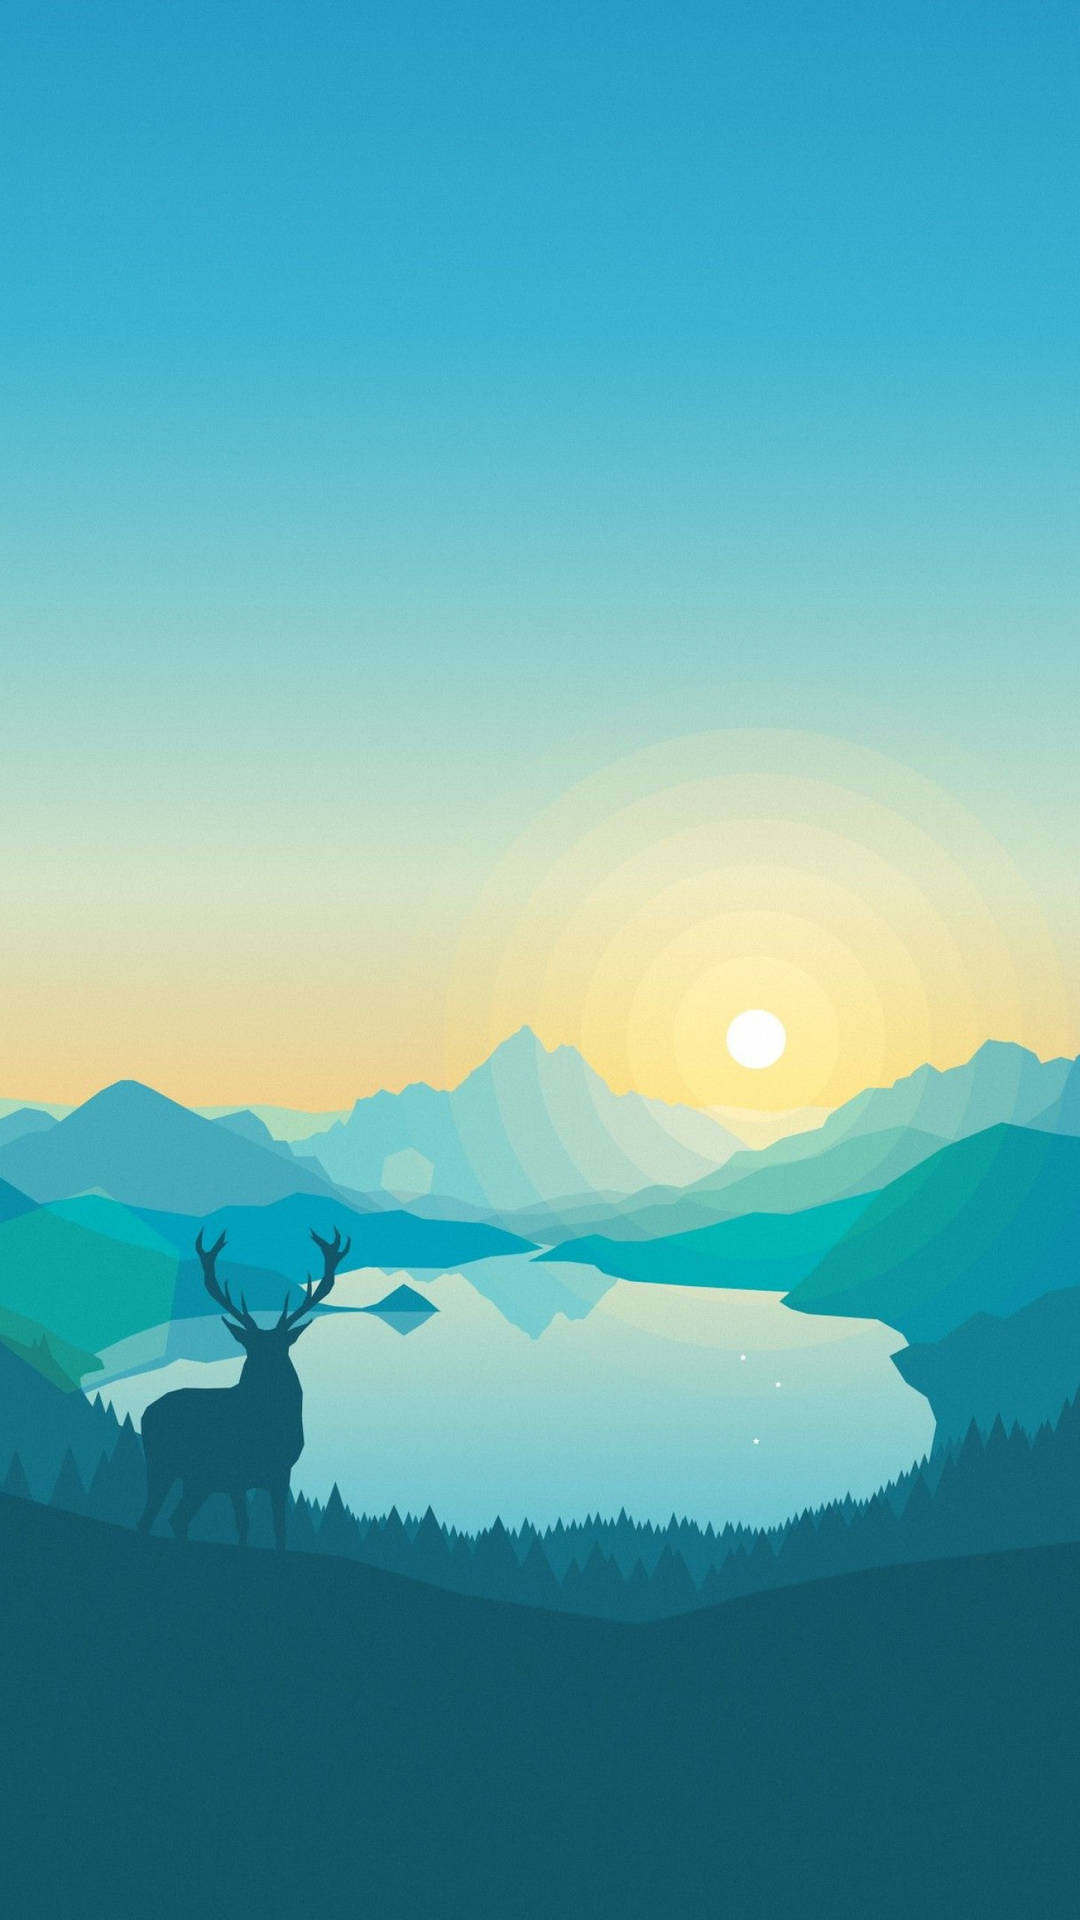 Enjoy the beauty of nature with the all new Deer Iphone Wallpaper